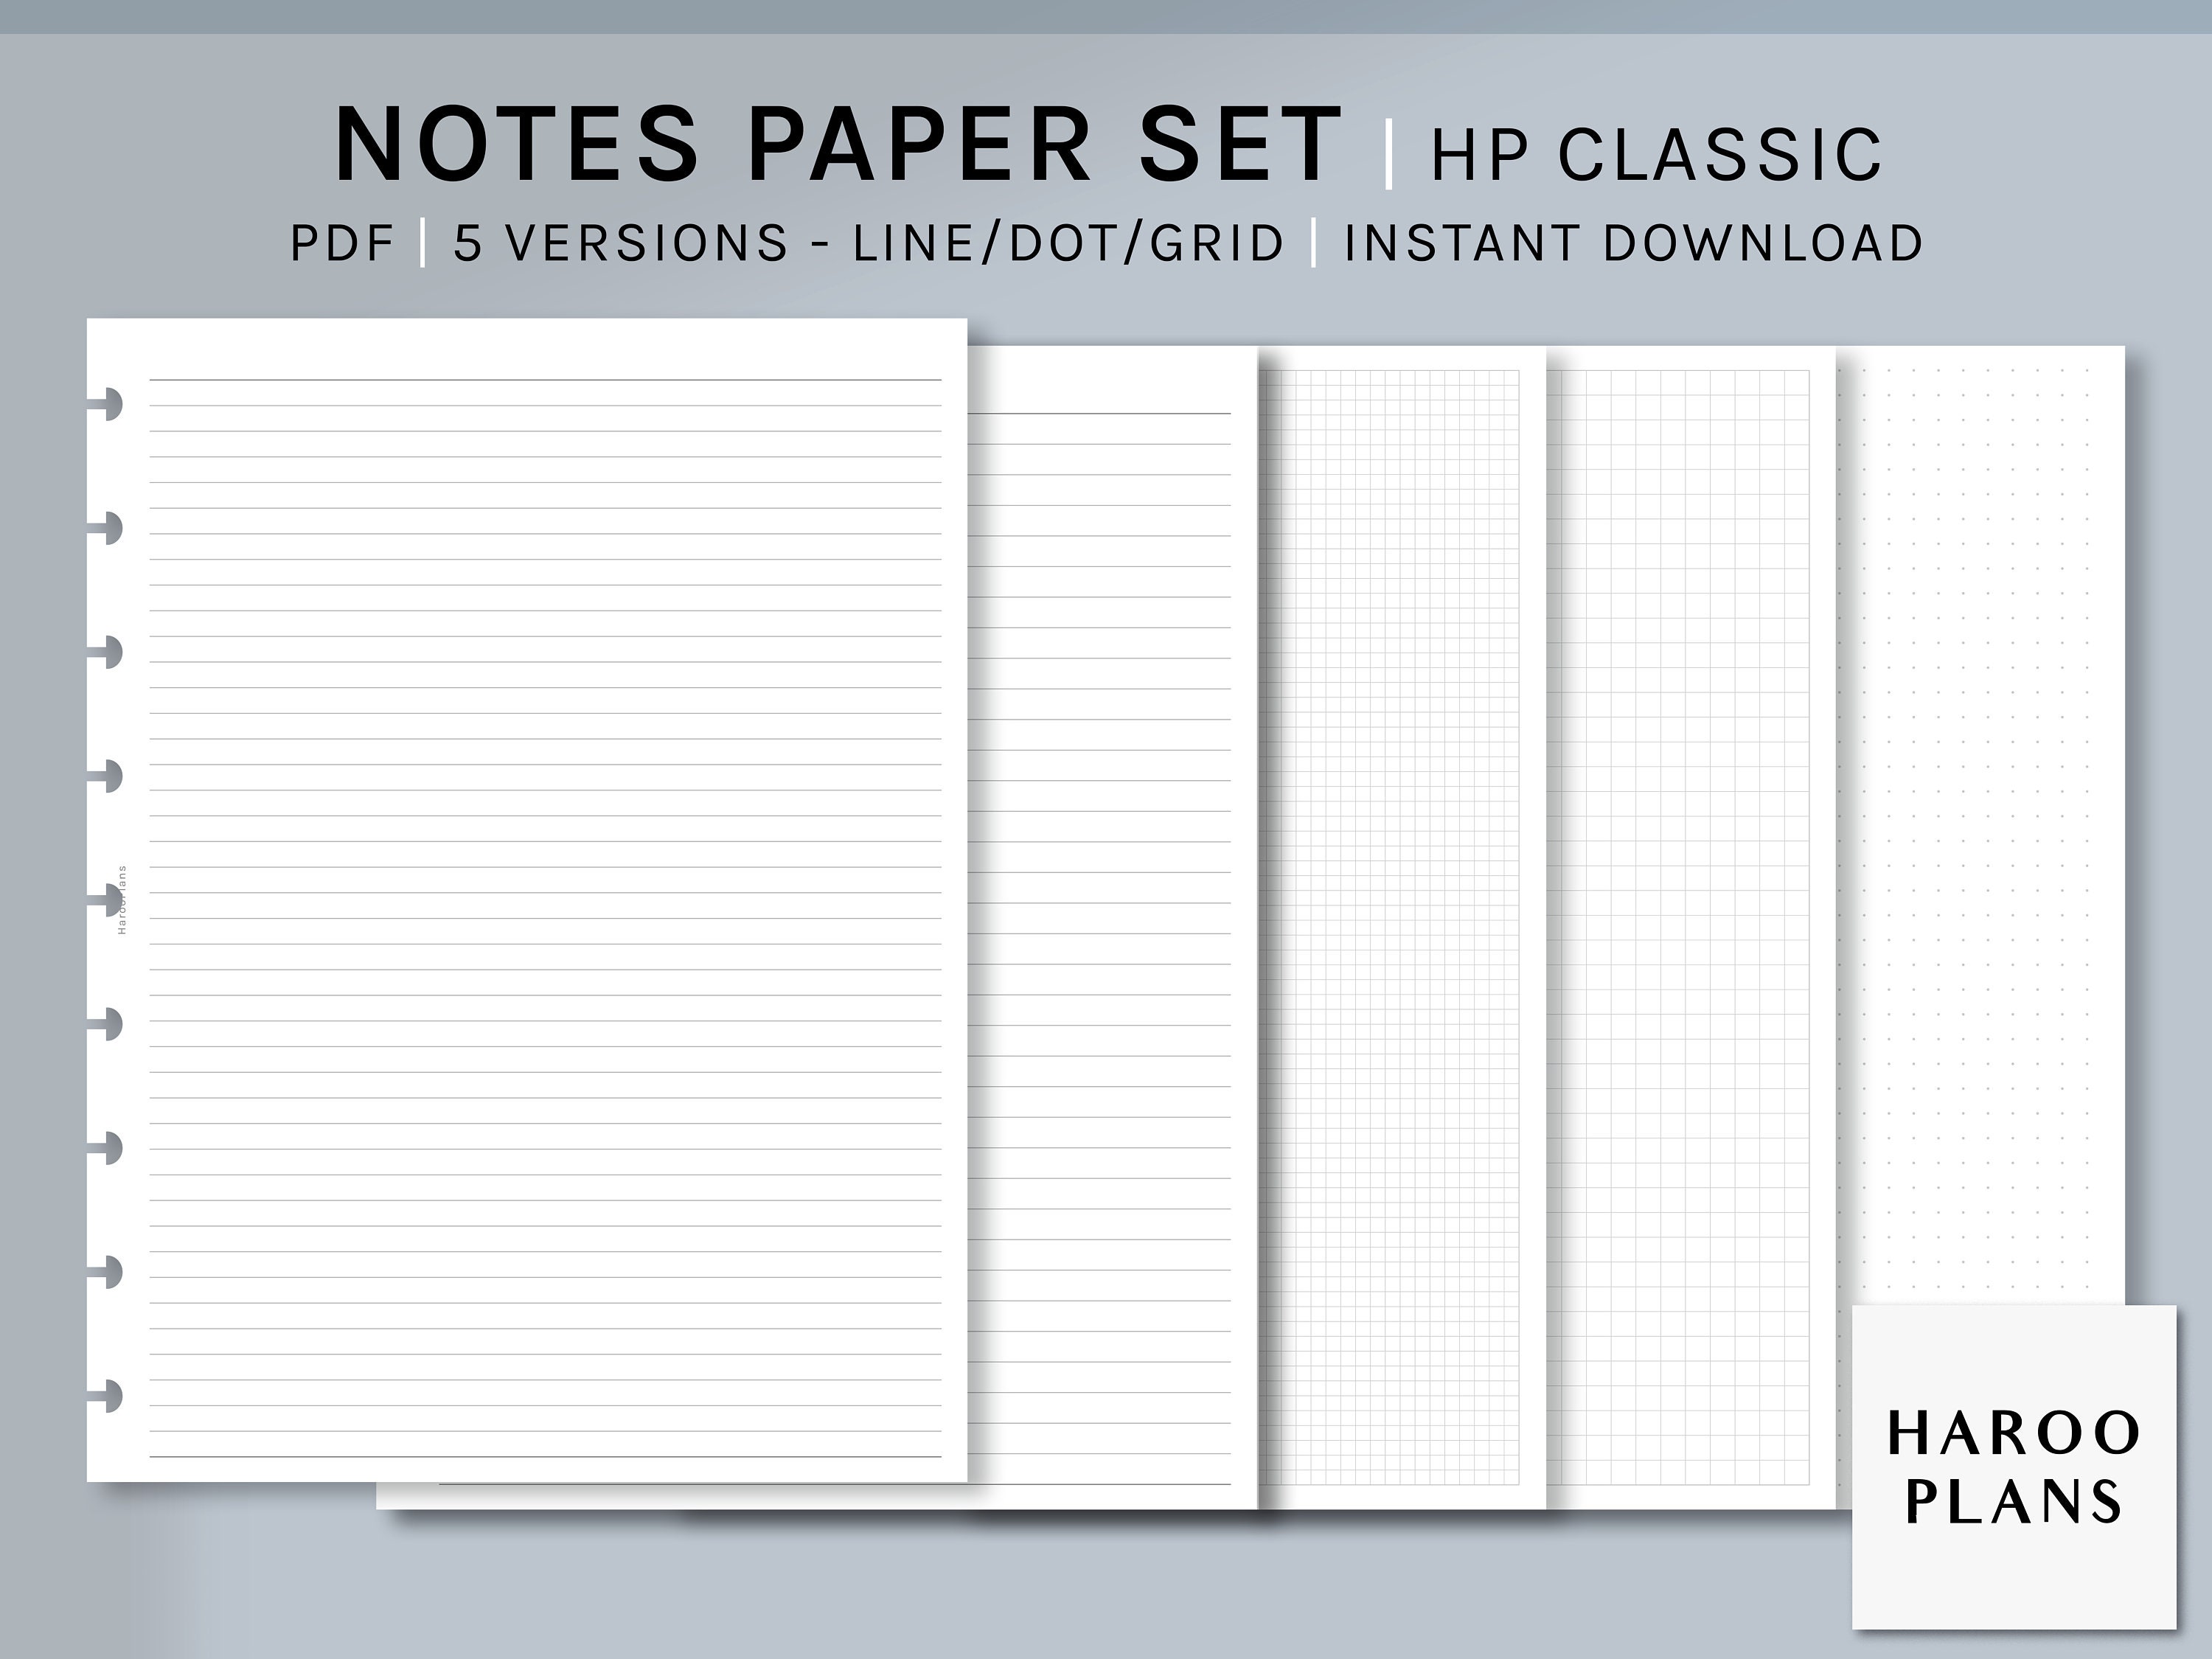 Field Notes Journal Bundle Includes FN Rows and Columns Tracing Card, FN  Ruler and FN Basic Stencil. Time Saver Get It Over Here. 